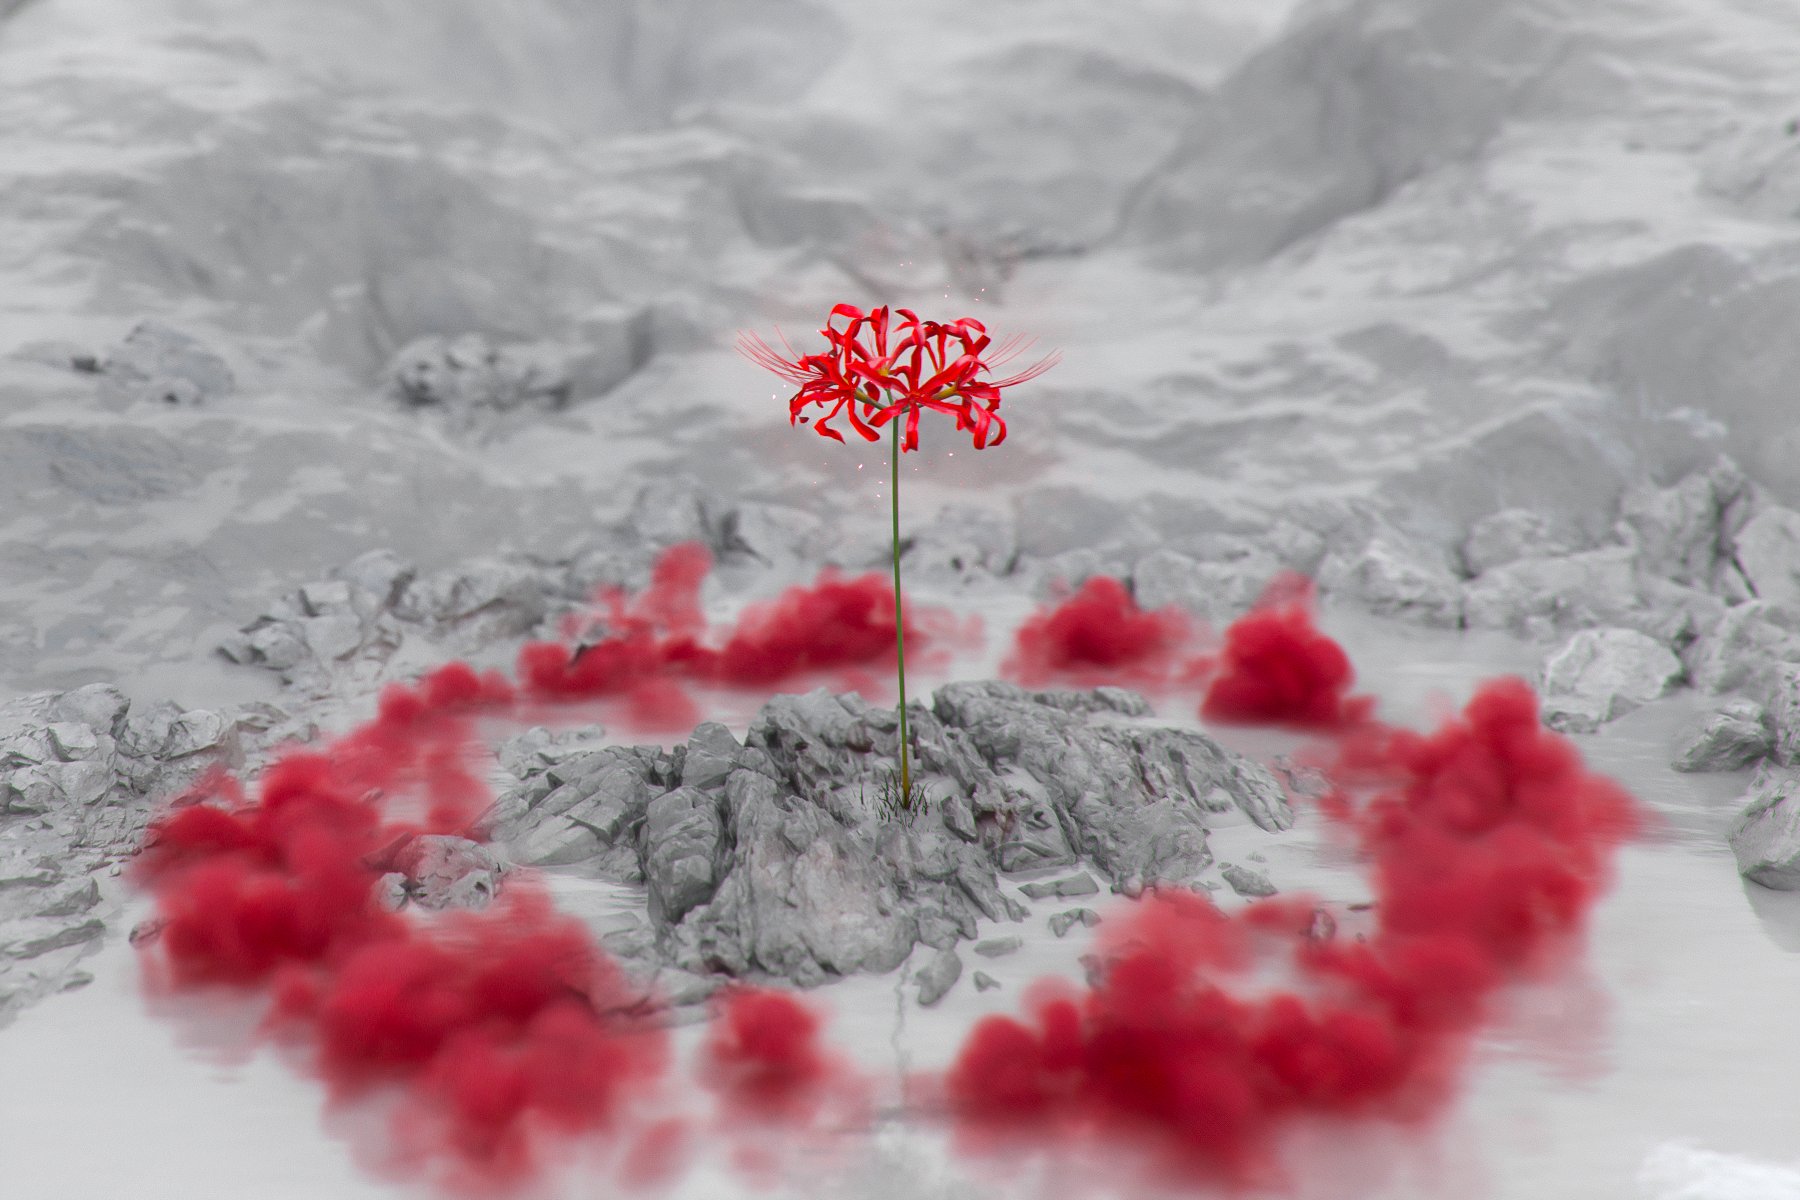 Spider Lilies Smoke Red 3D Abstract CGi Digital Art Landscape Ash Particles Reflection Abstract Flow 1800x1200